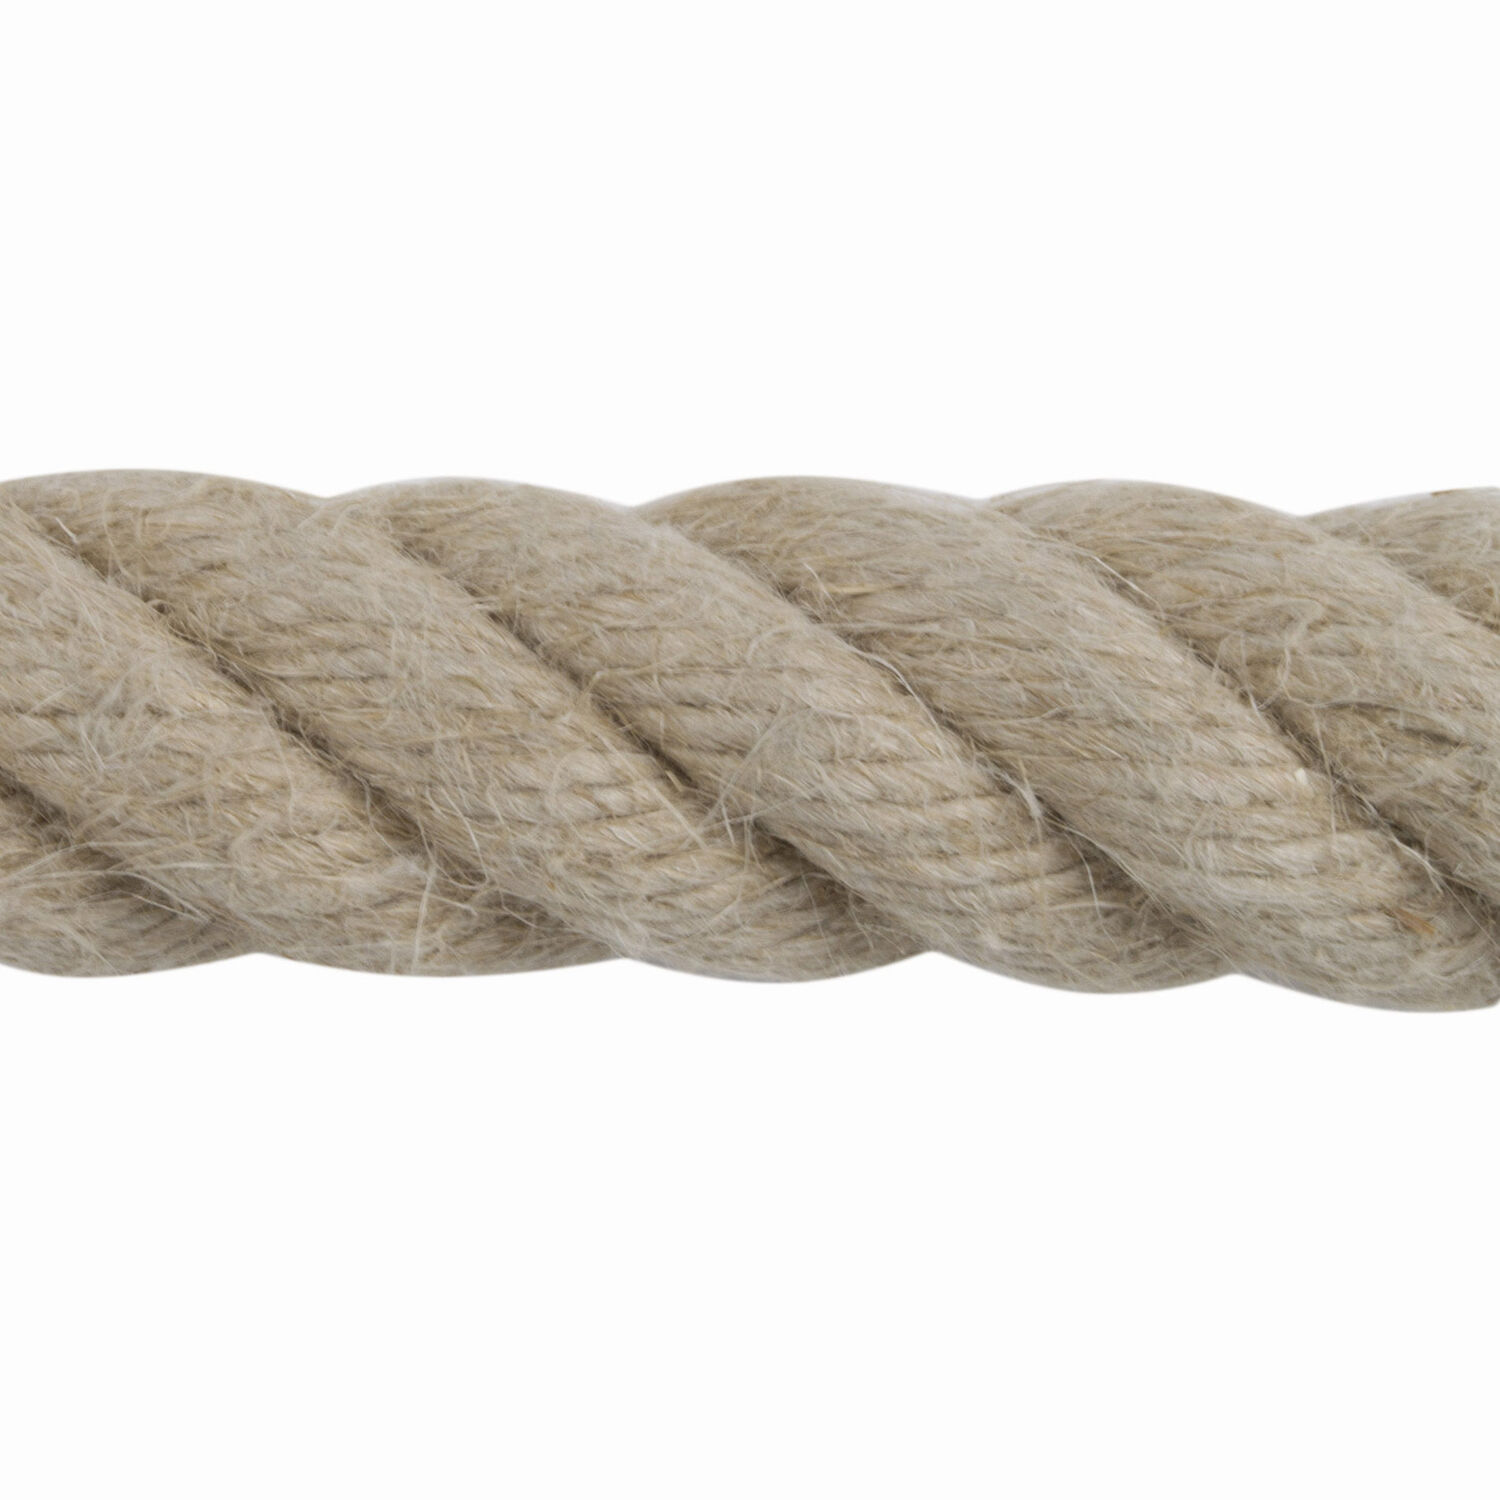 POLY HEMP 20MTS x 20MM THICK FOR GARDEN DECKING ROPE SYNTHETIC HEMP HEMPEX 